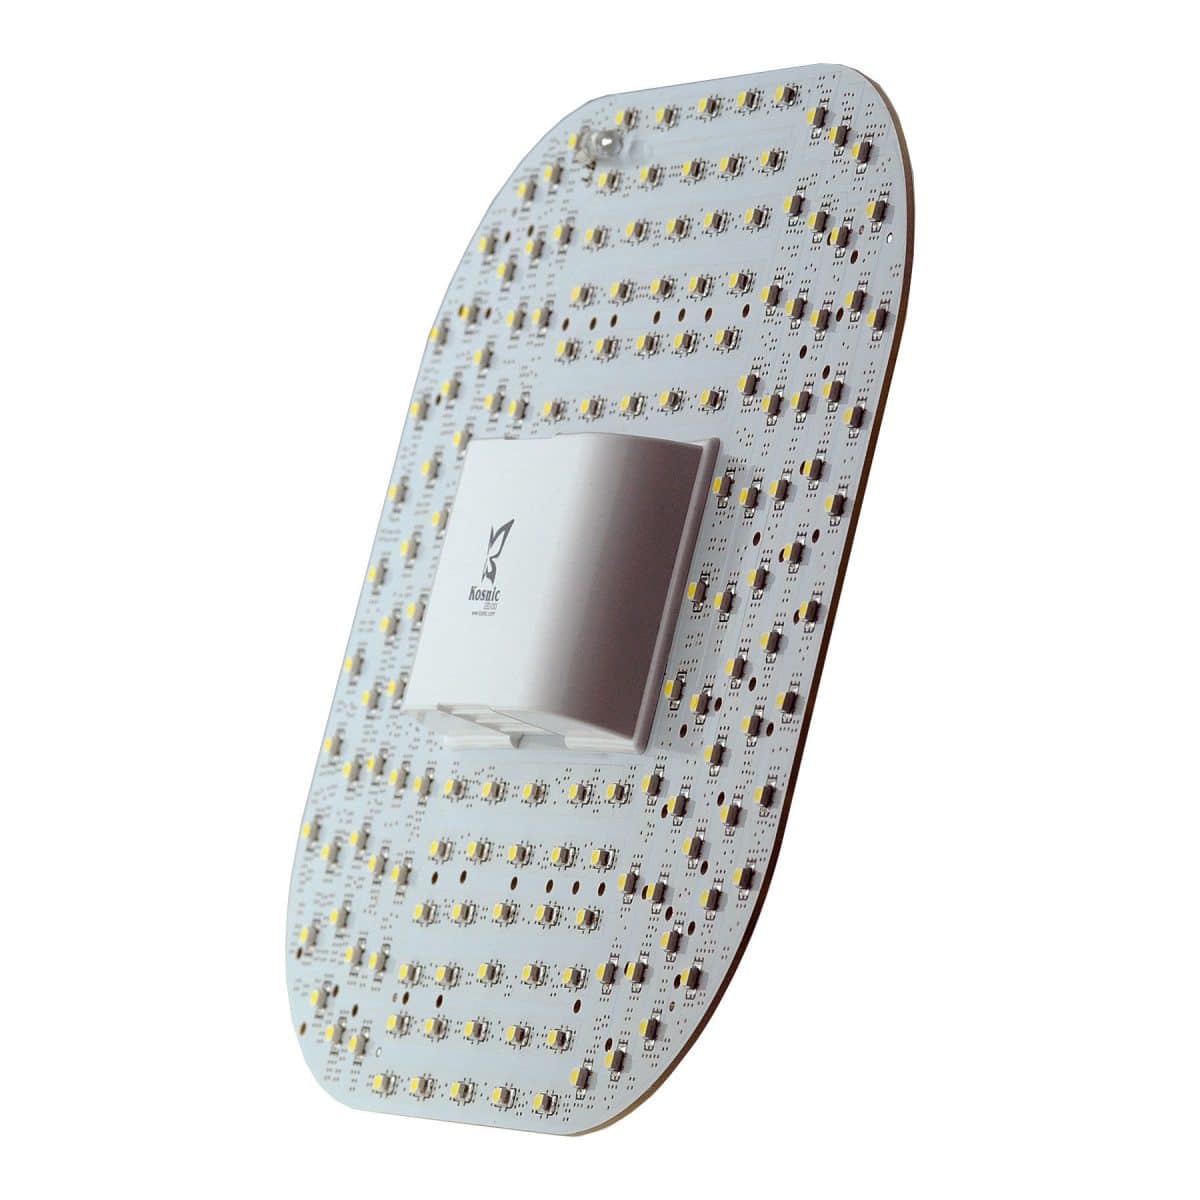 12watt 2D LED 4pin Cool White Equivalent to 28watt - See product description for special instructions